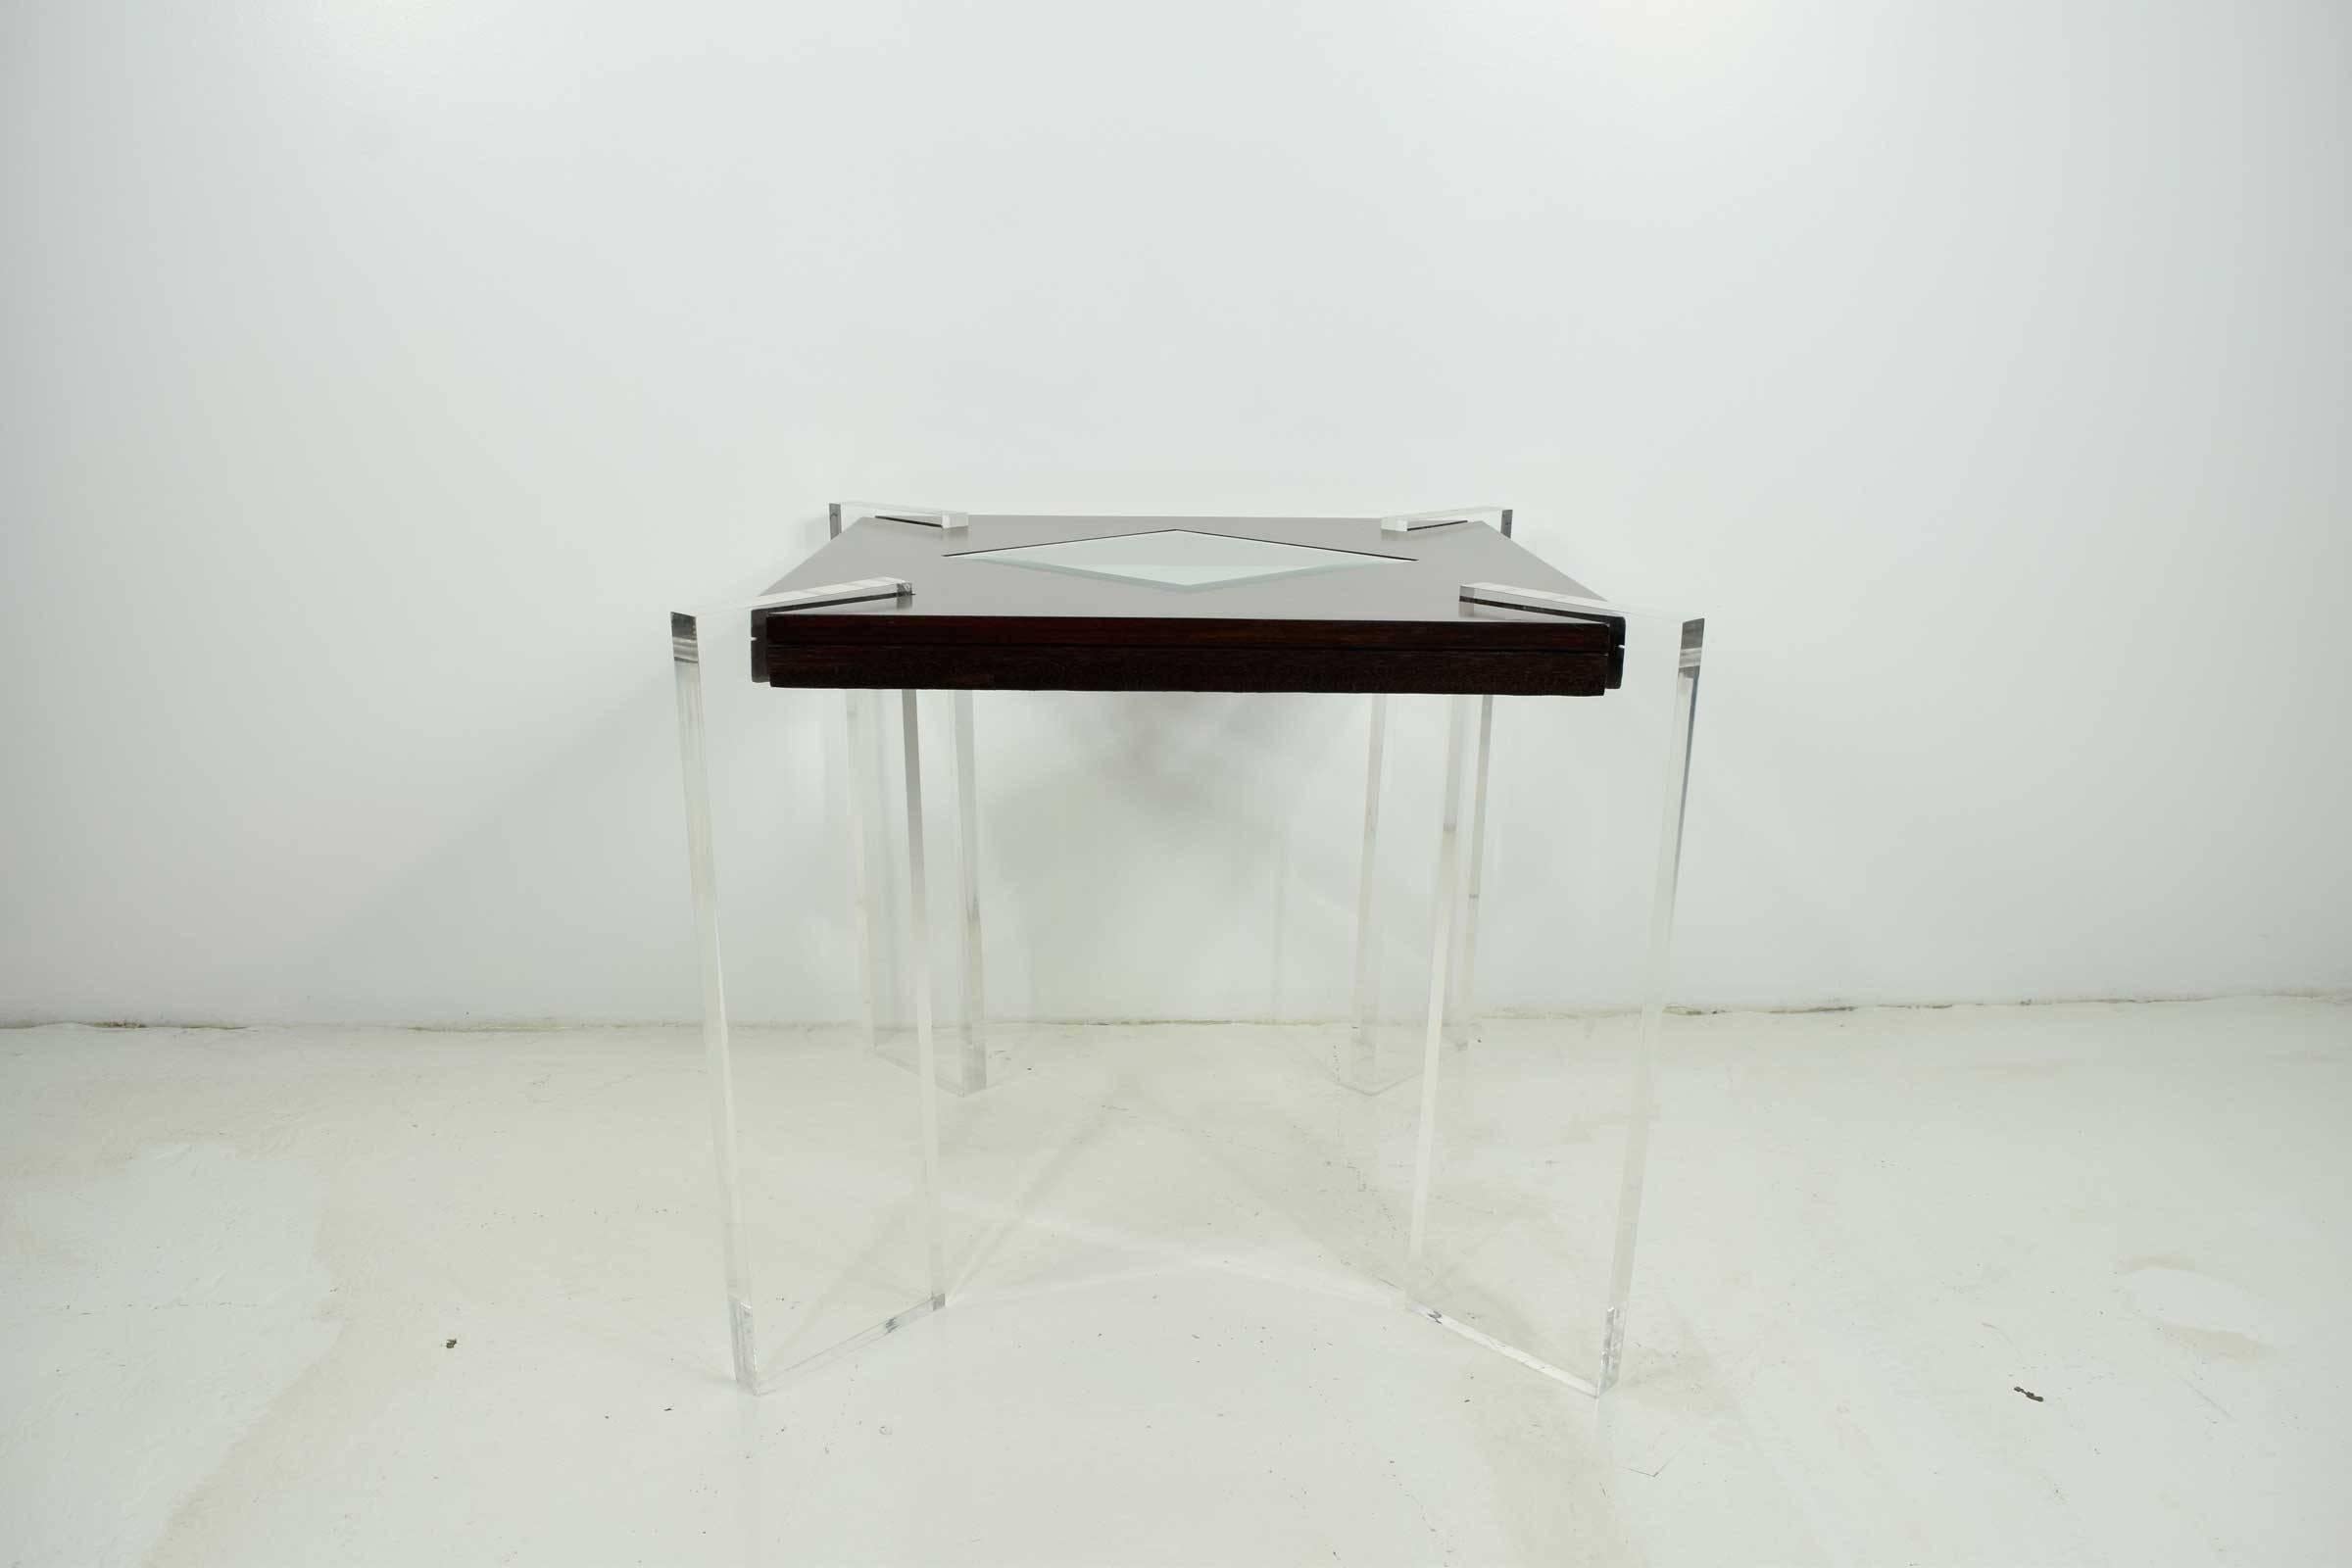 Inlaid beveled glass top, rosewood veneer, thick Lucite legs. We have a matching console. Please see our storefront.